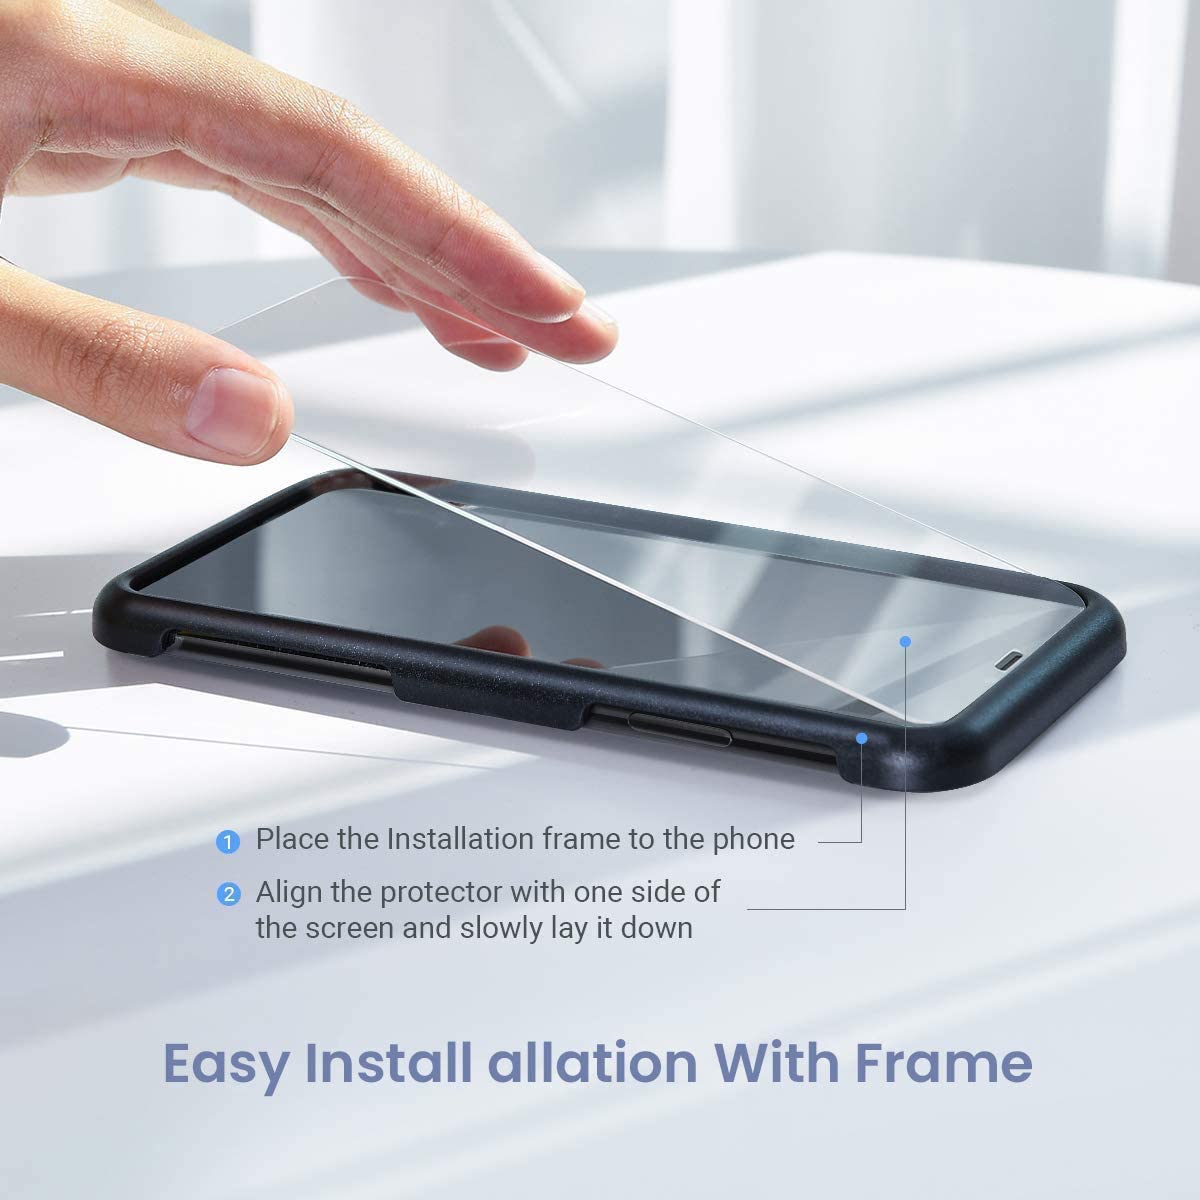 Danny HD Transparent Screen Protector OPPO A1 A52 A7 2018 A7X AX5 AX5s AX7 K3 K5 Neo 9 F1s F5 F7 F9 F11 F15 F17 Pro Tempered Glass